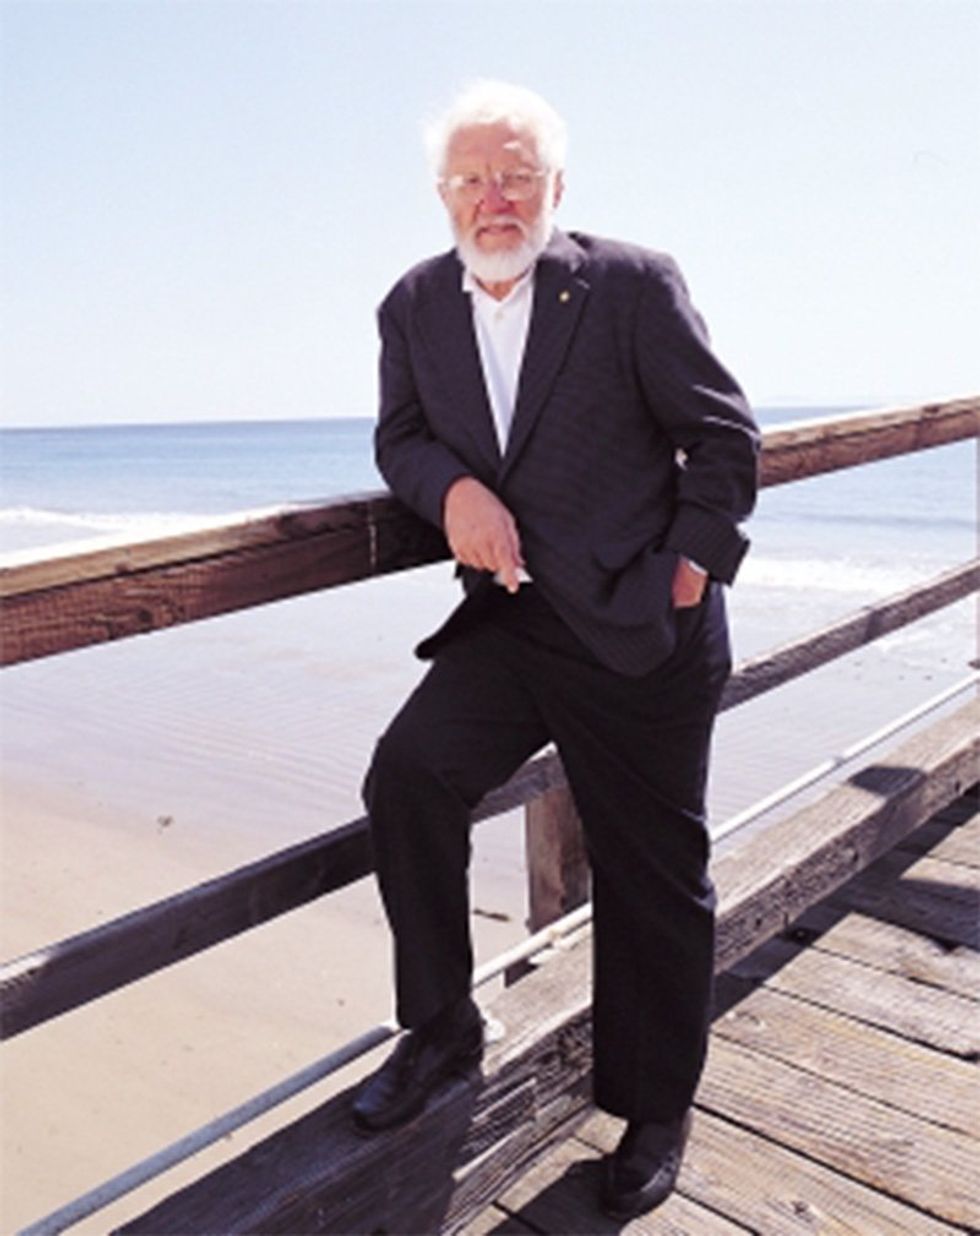 Photo of a man on a pier by a beach.